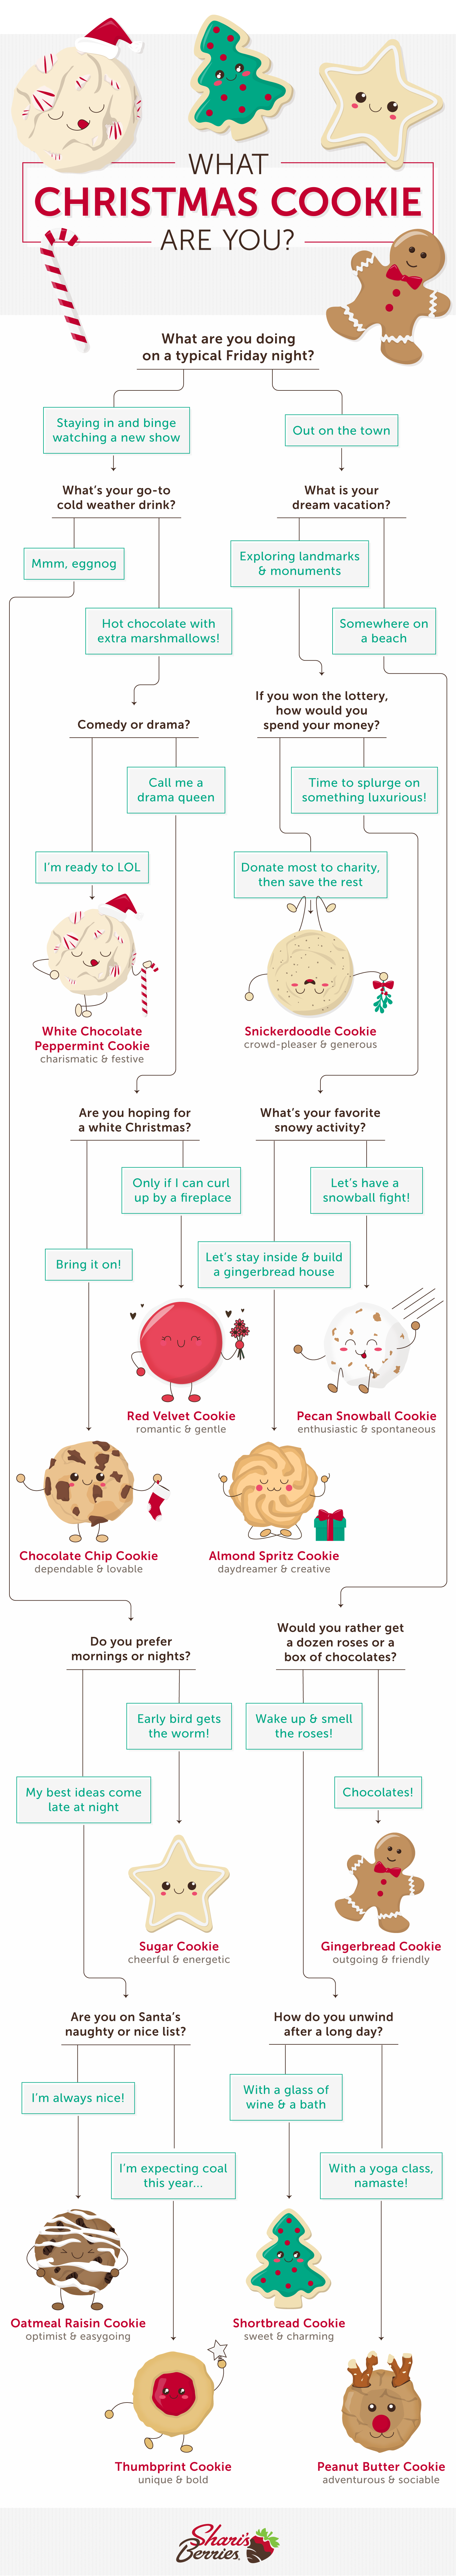 cookie personality 